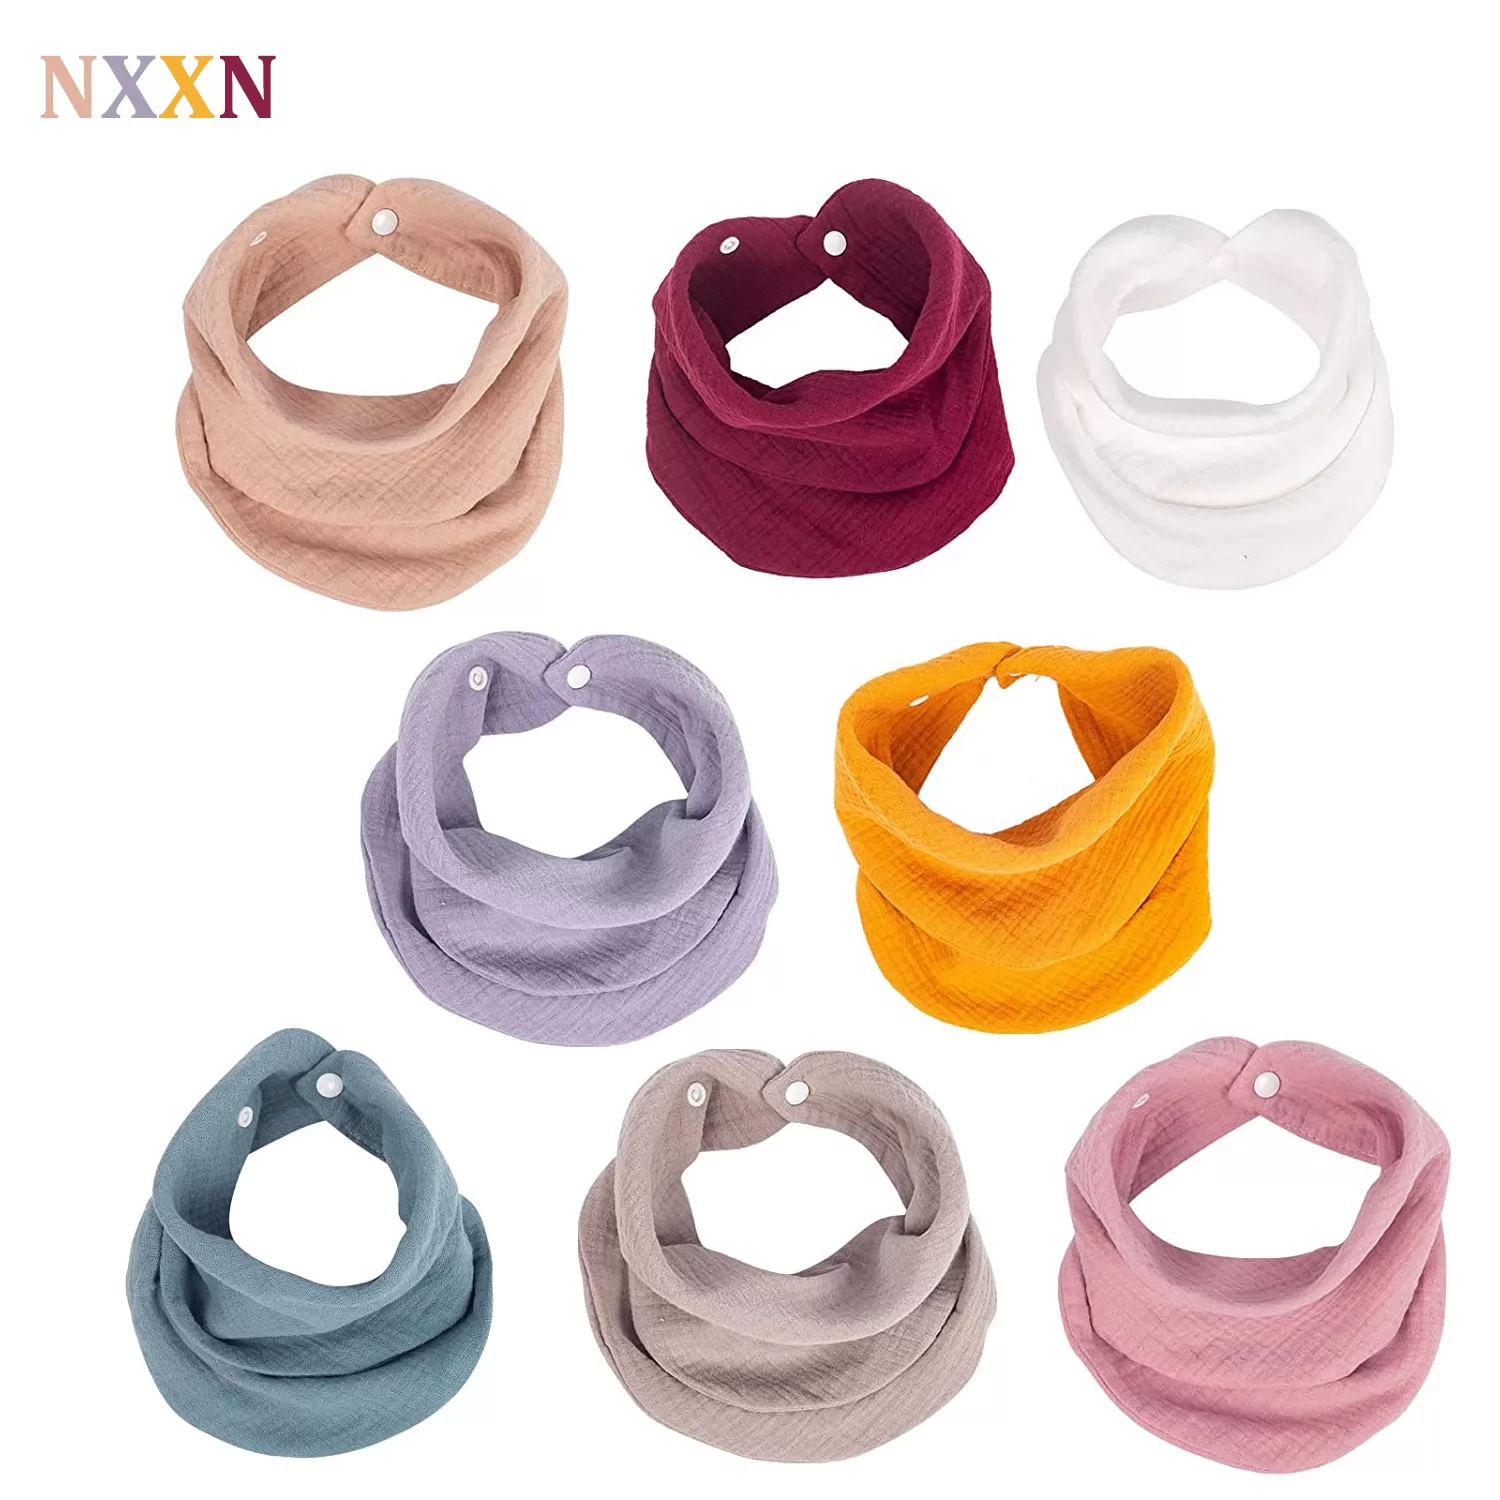 NXXN Muslin Baby Bandana Bibs, Multi-Use Scarf Bibs, Super Soft & Absorbent Drooling Bibs, Breathable Cotton Burp Cloths, 8 Pack (Solid Color)